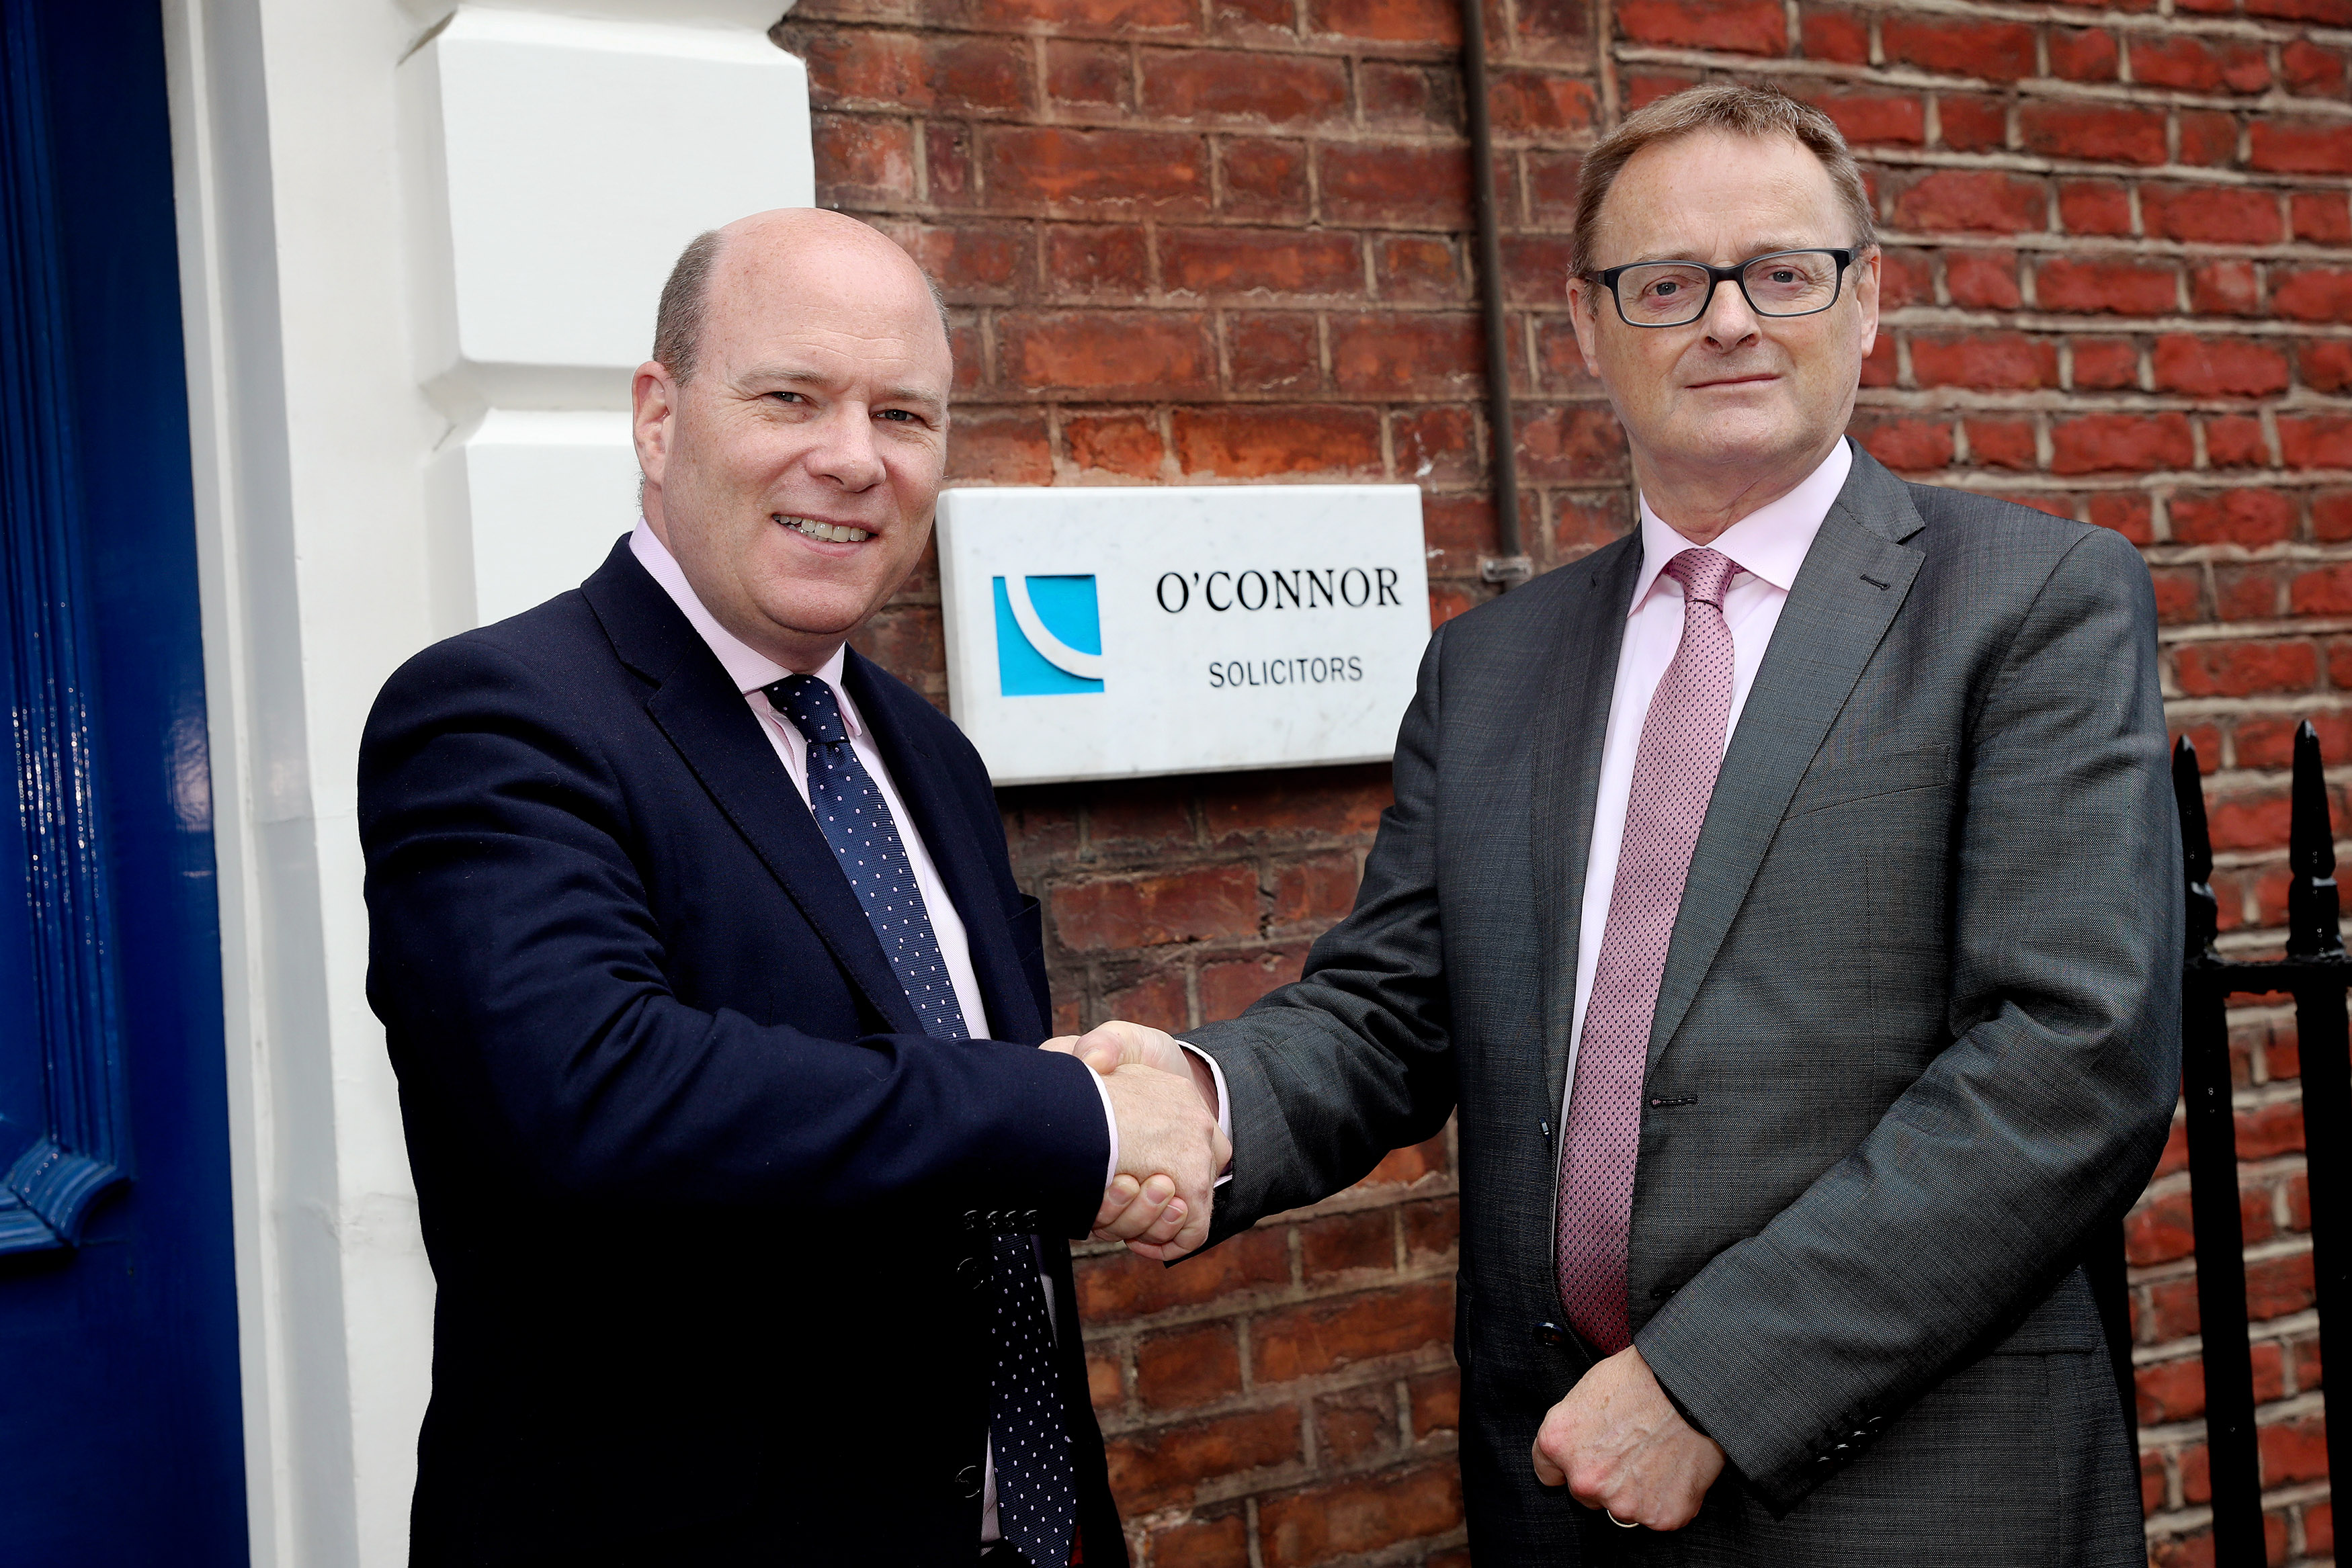 Dublin firm O'Connor Solicitors grows through merger with Peter Morrissey & Company